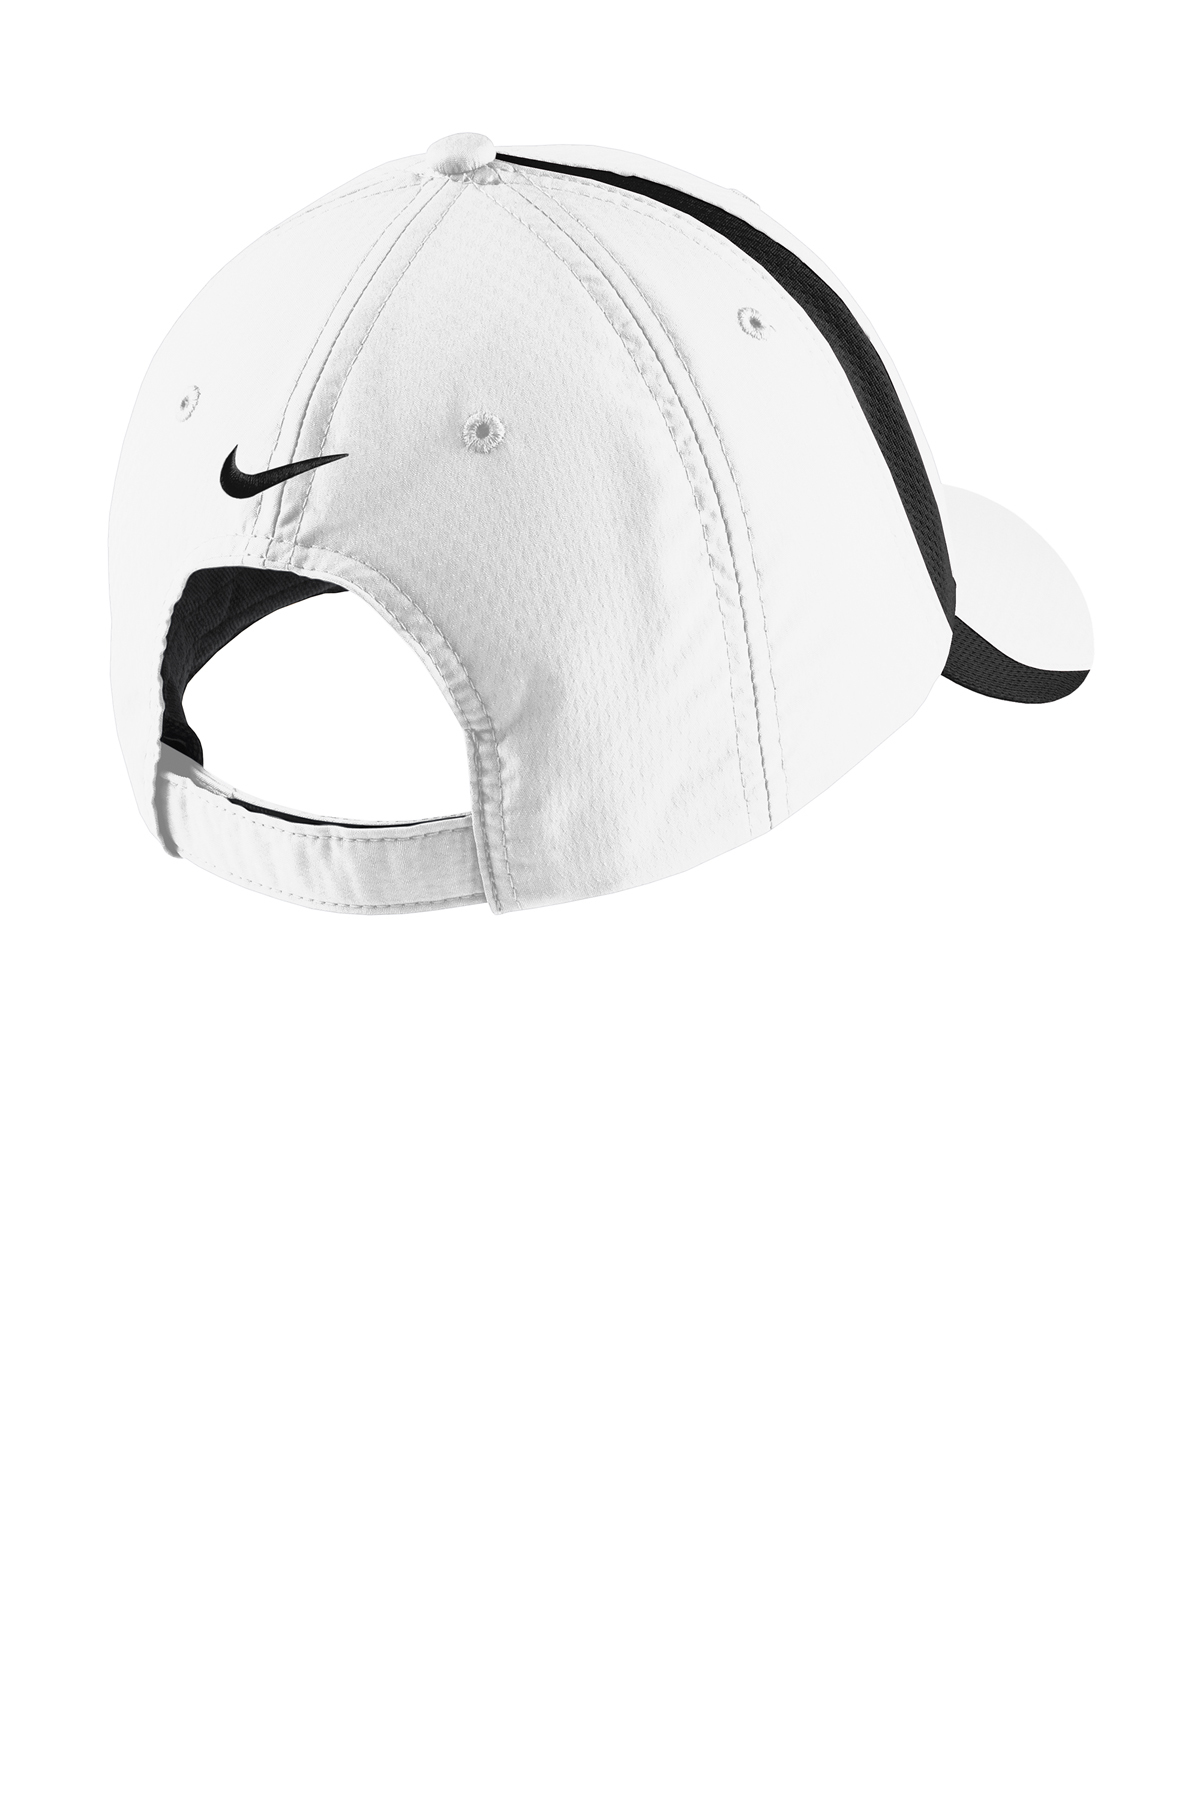 Nike Sphere Performance Cap | Product | Company Casuals